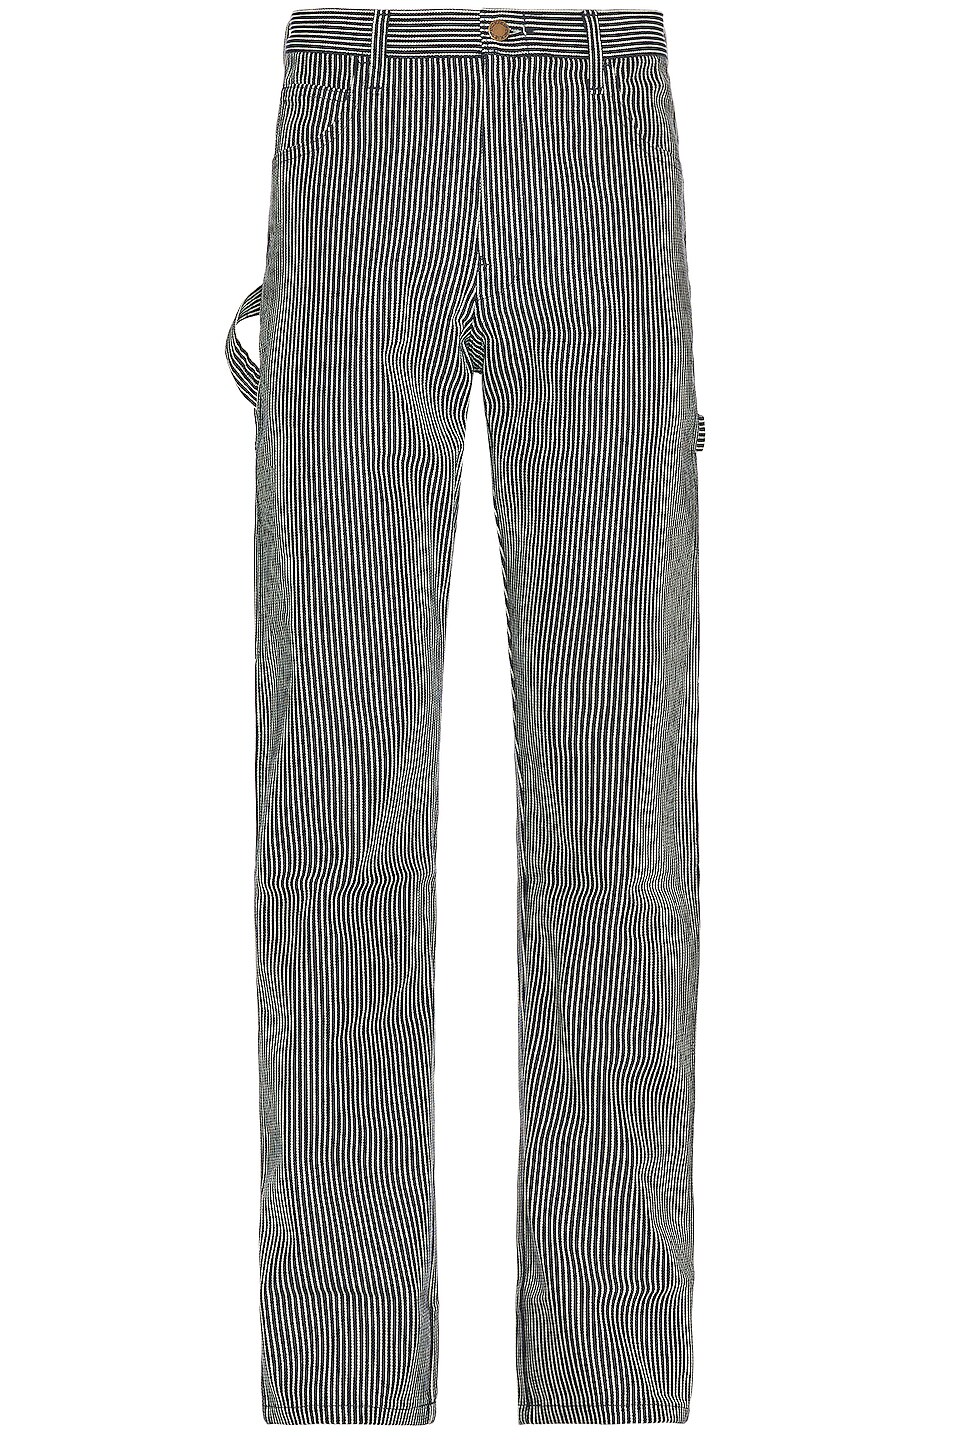 Image 1 of Dickies NYS Utility Painter Pant in Hickory Stripe